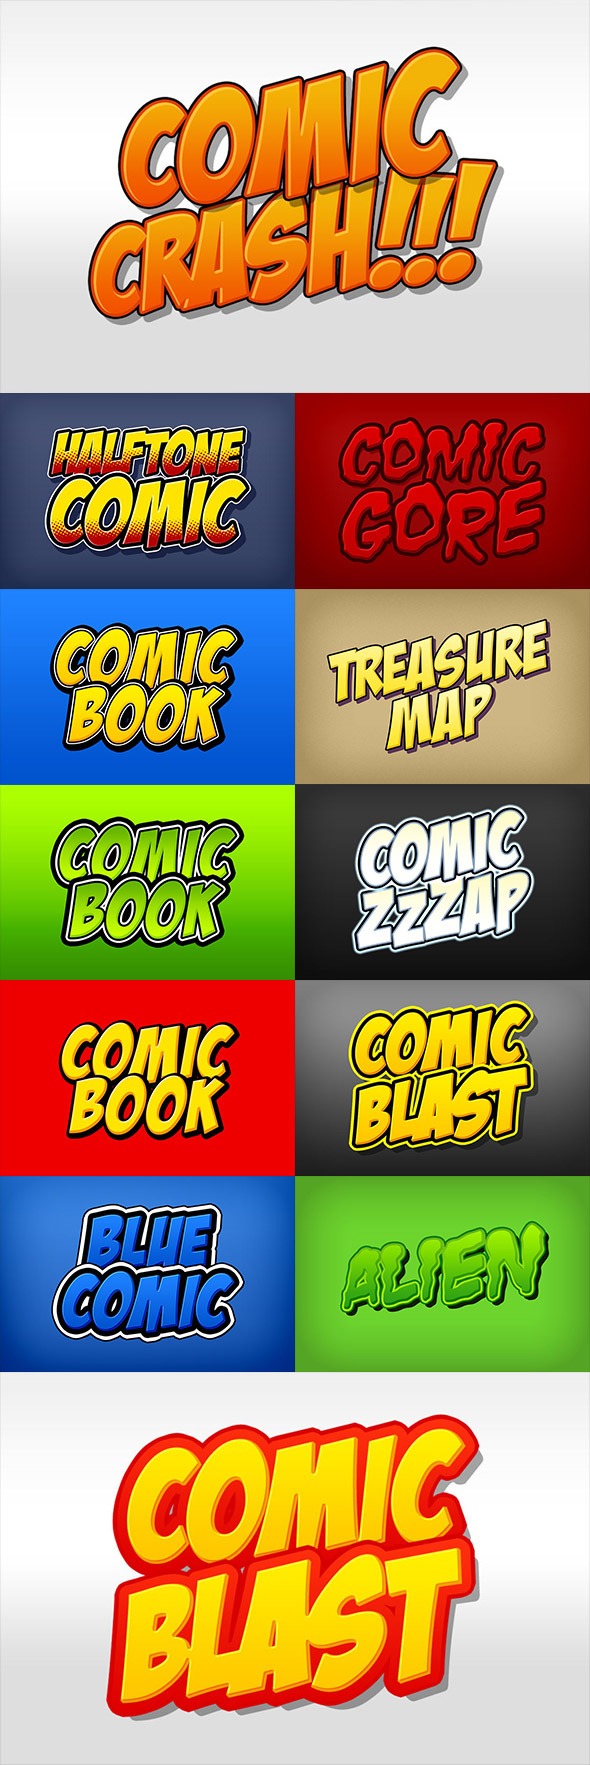 Comic Book and Cartoon Photoshop Styles Pack